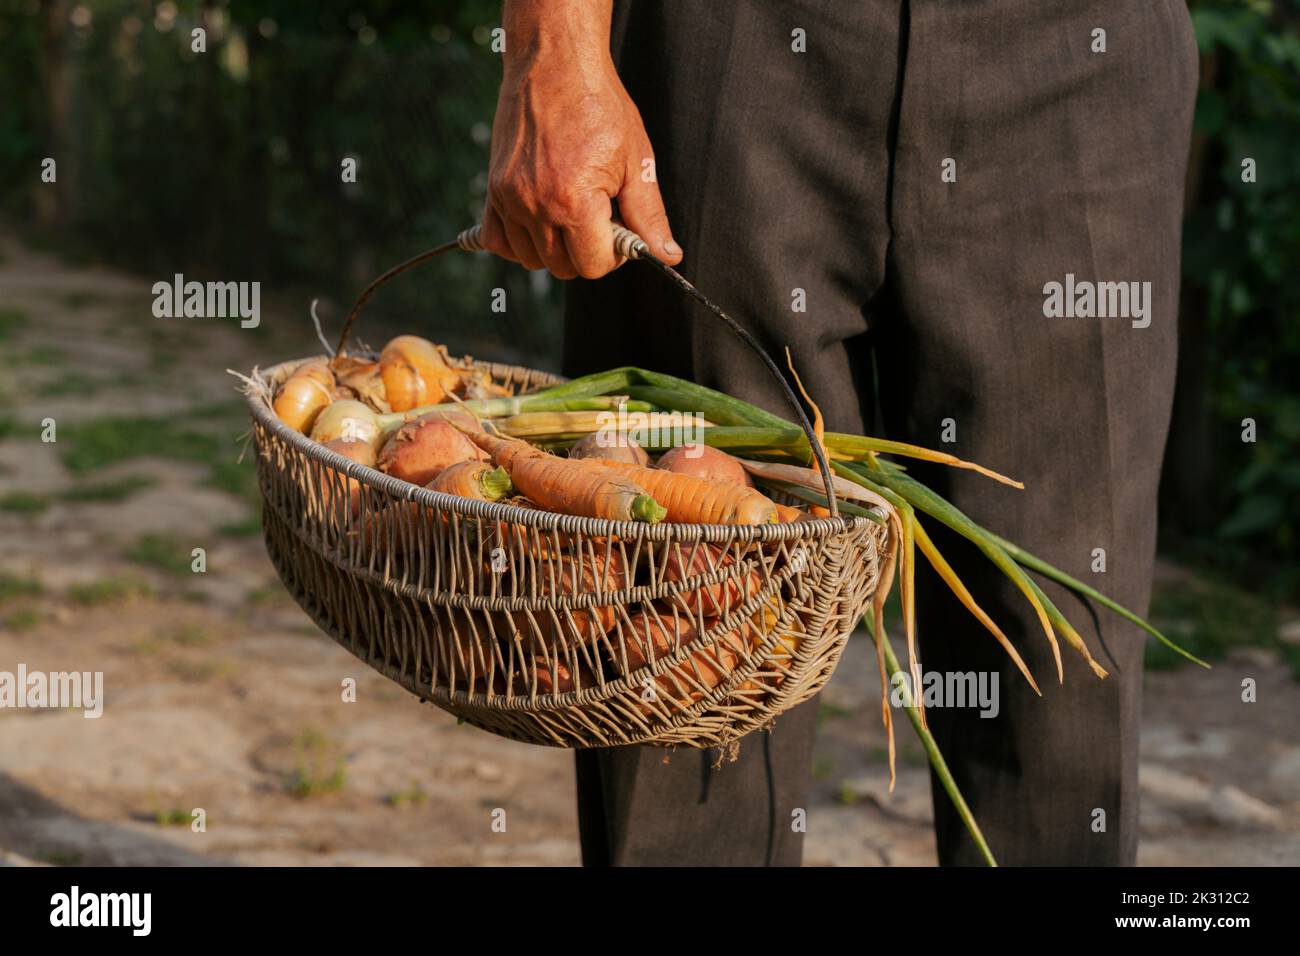 Farmer holding basket with vegetables Stock Photo